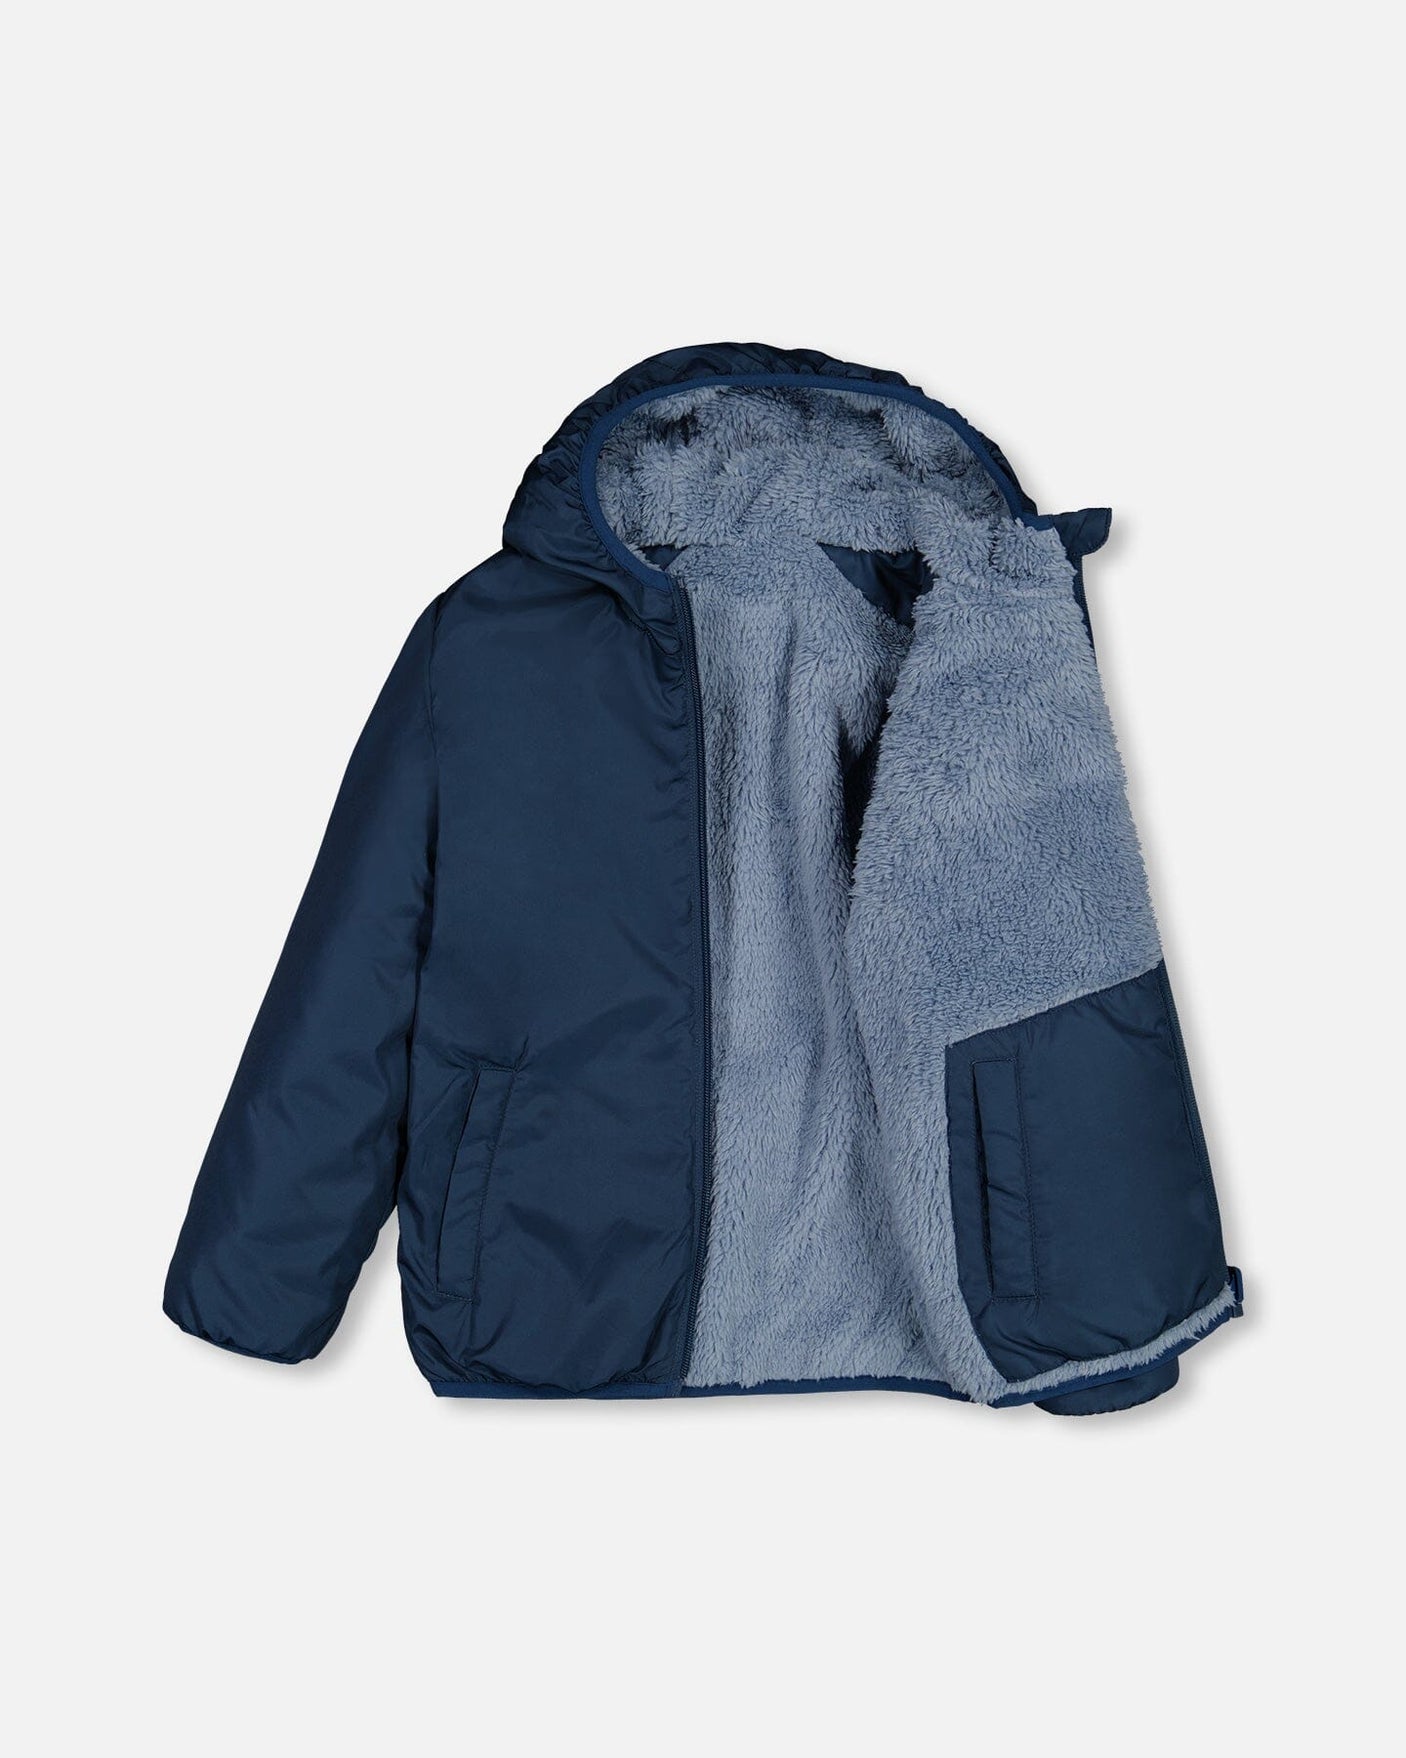 Transition Reversible Sherpa And Nylon Jacket Teal Blue-4